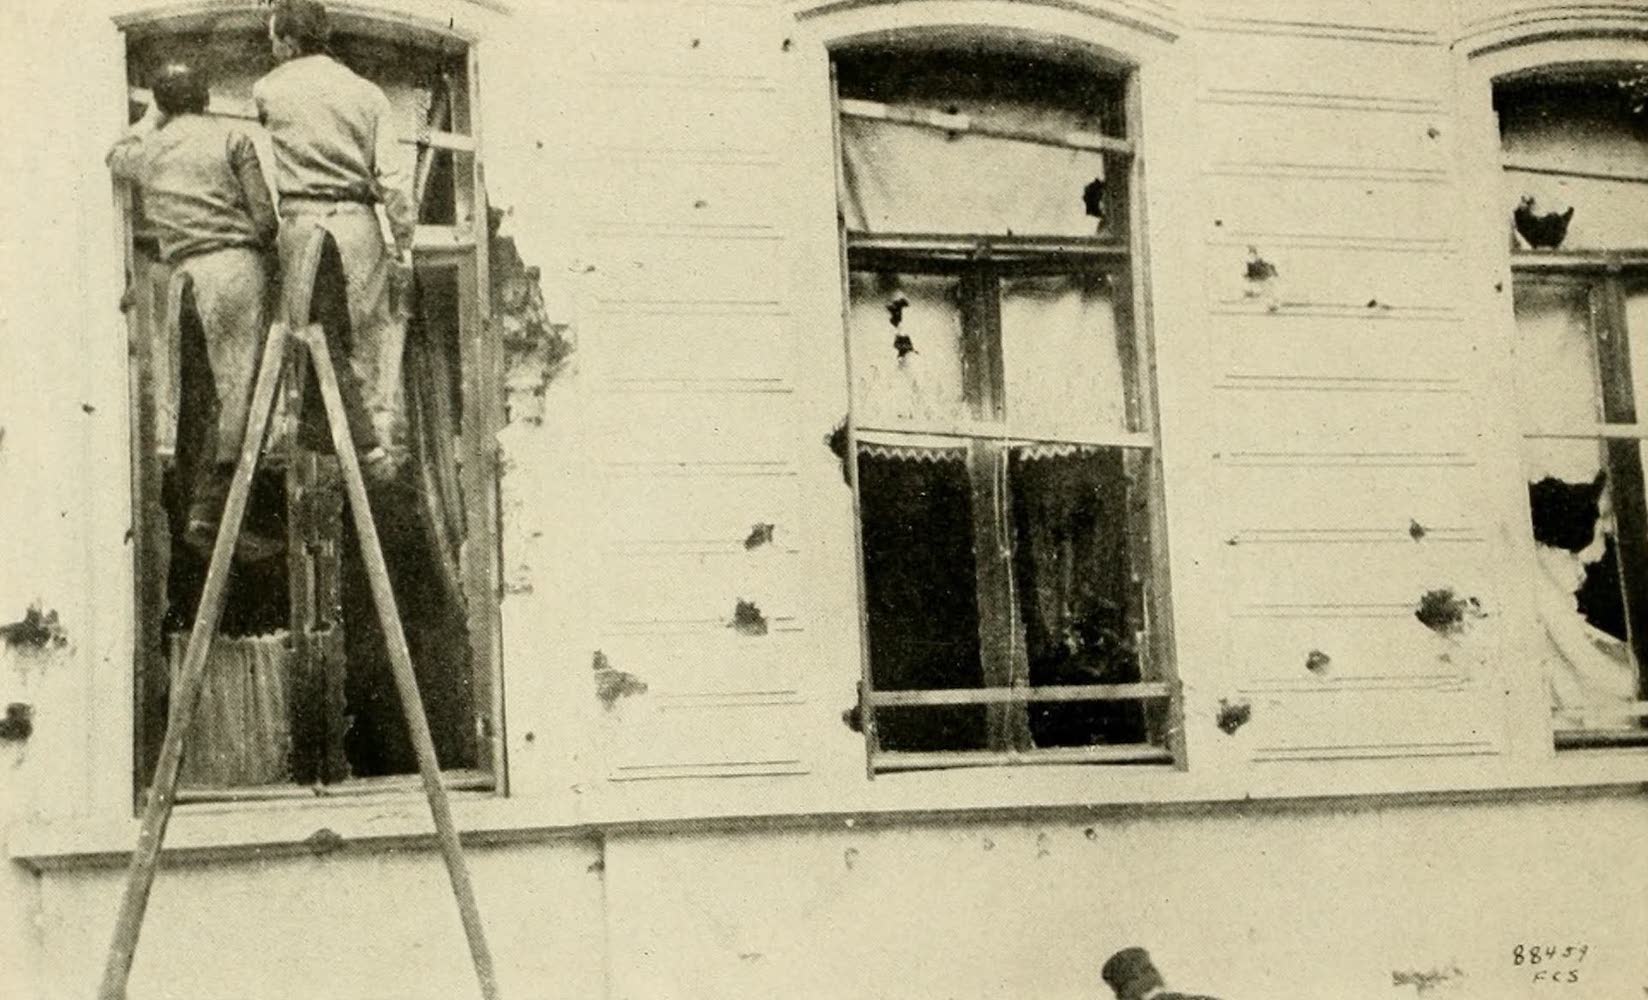 First Photos of Damage Caused Bv Zeppelin Bomb Throwers in Antwerp